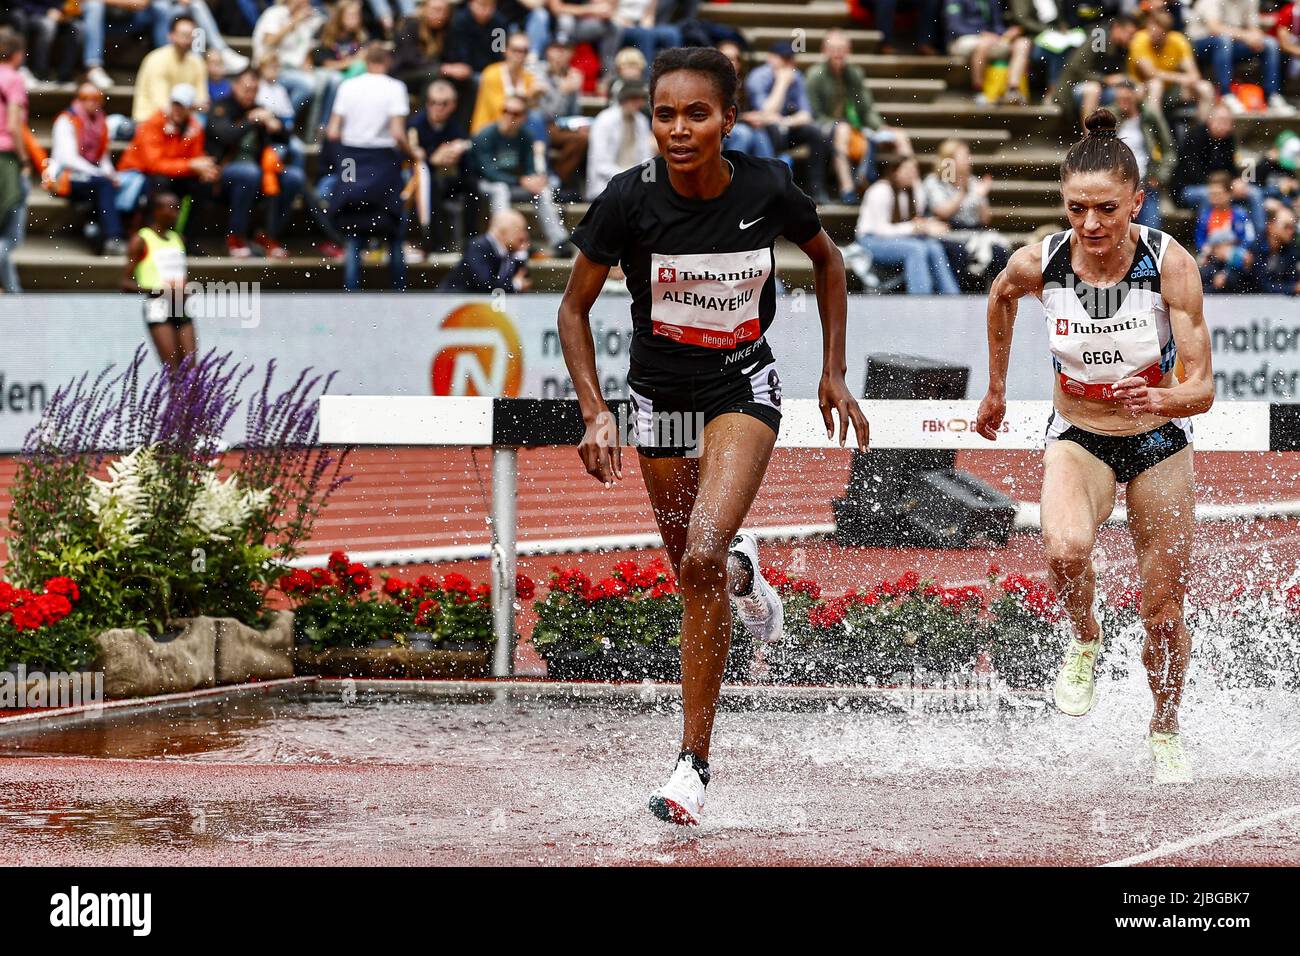 2022-06-06 15:22:05 HENGELO - Sembo Alemayehu and Luiza Gega in action on the women's 3000 meters steeplechase during the FBK Games. ANP VINCENT JANNINK netherlands out - belgium out Stock Photo